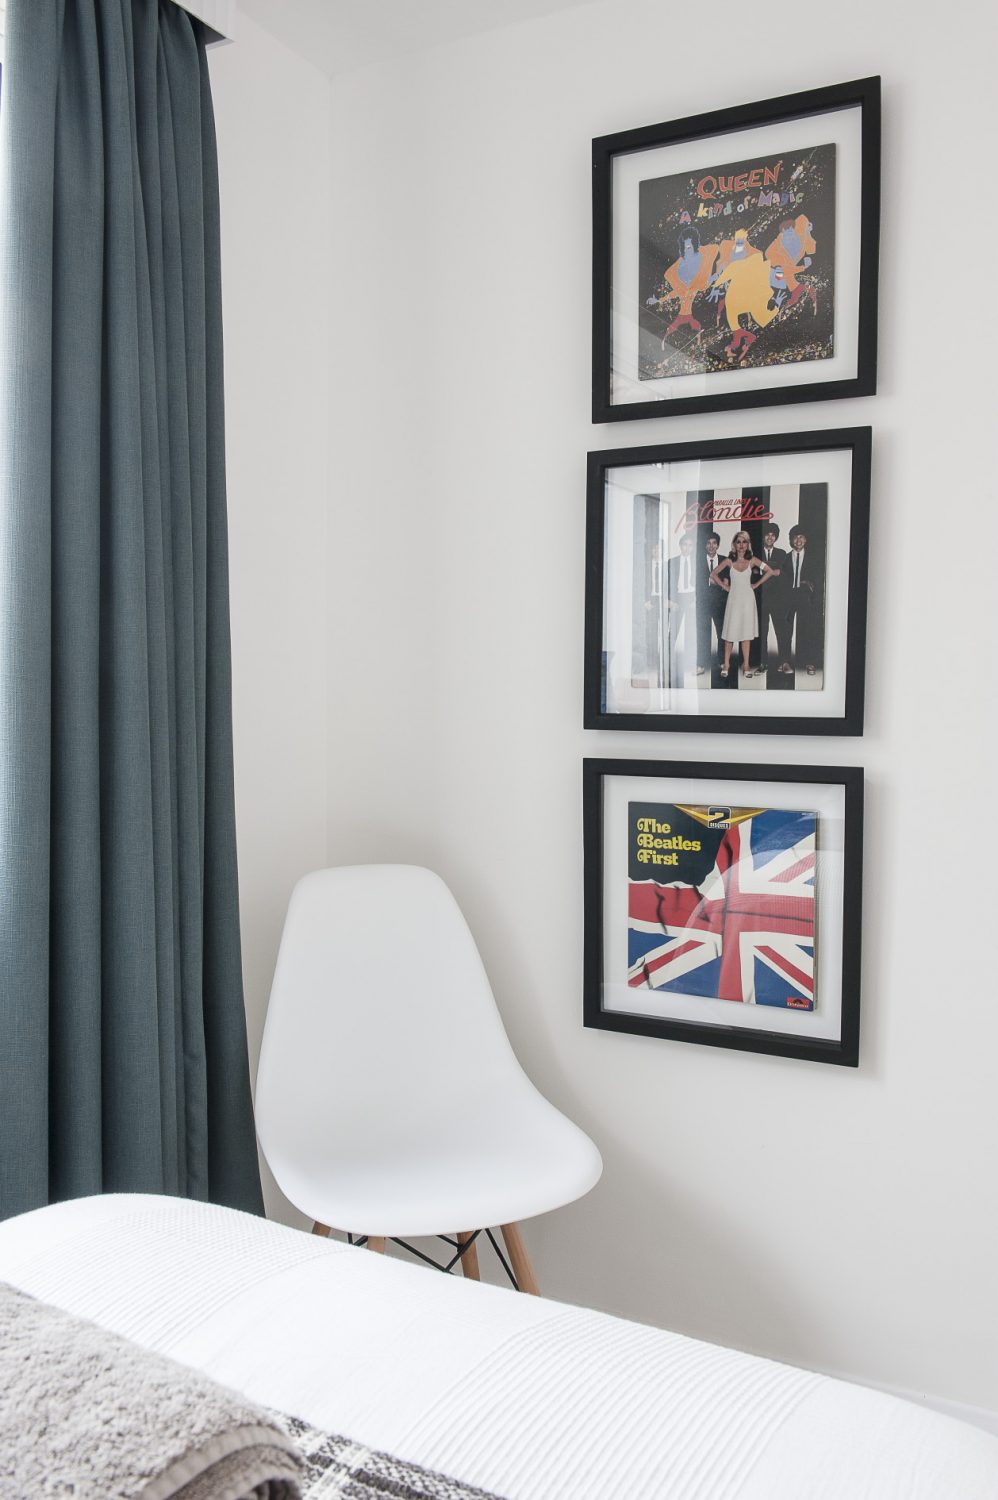 A trio of framed album covers are mounted onto one wall